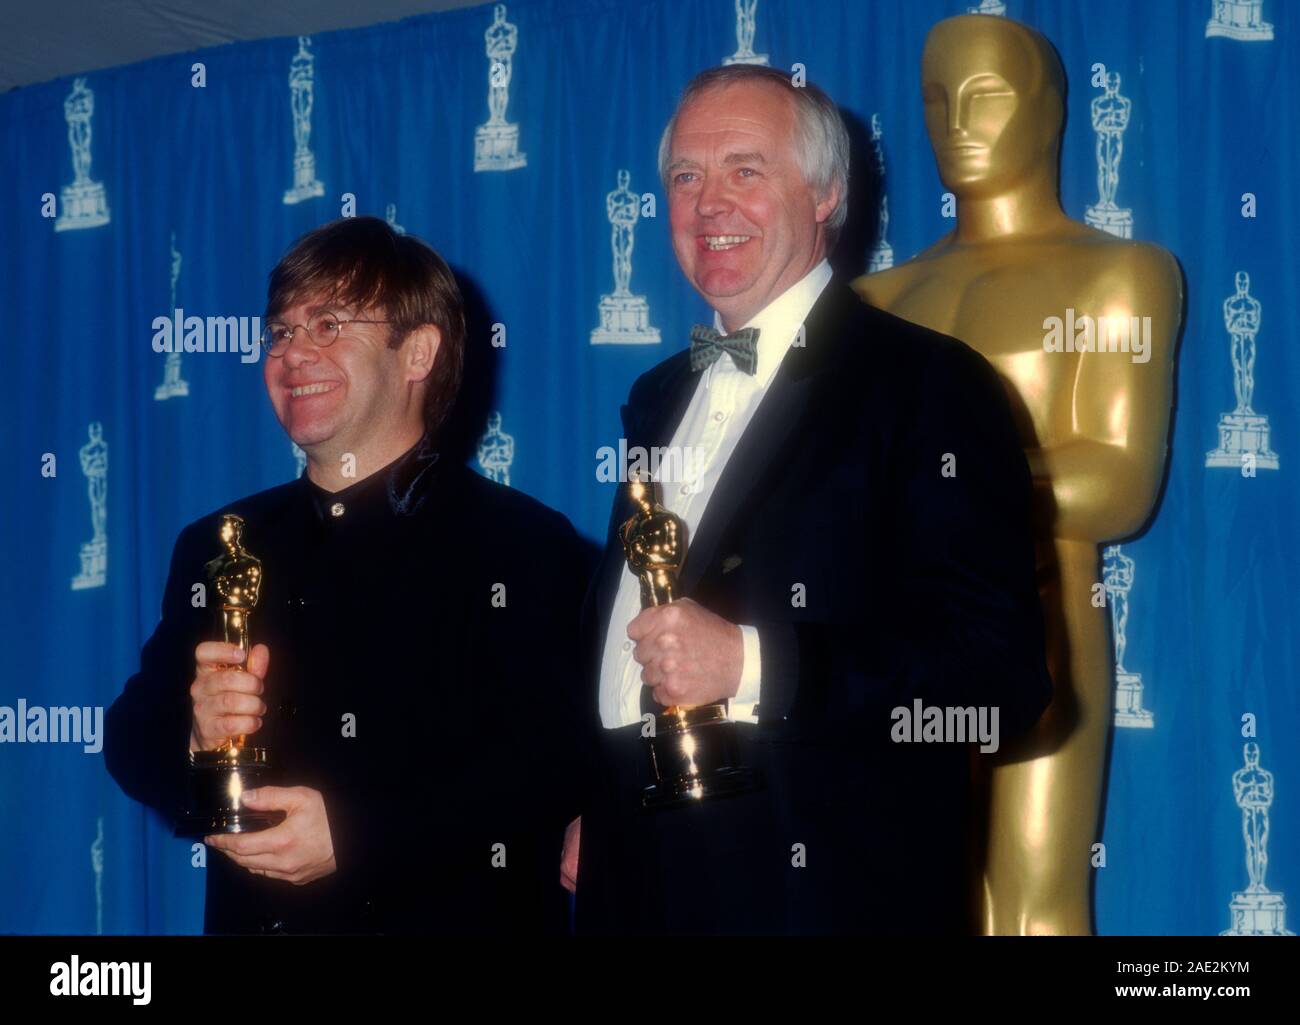 Los Angeles, California, USA 27th March 1995 Singer/musician Elton John and lyricist Tim Rice attend the 67th Annual Academy Awards on March 27, 1995 at Shrine Auditorium in Los Angeles, California,